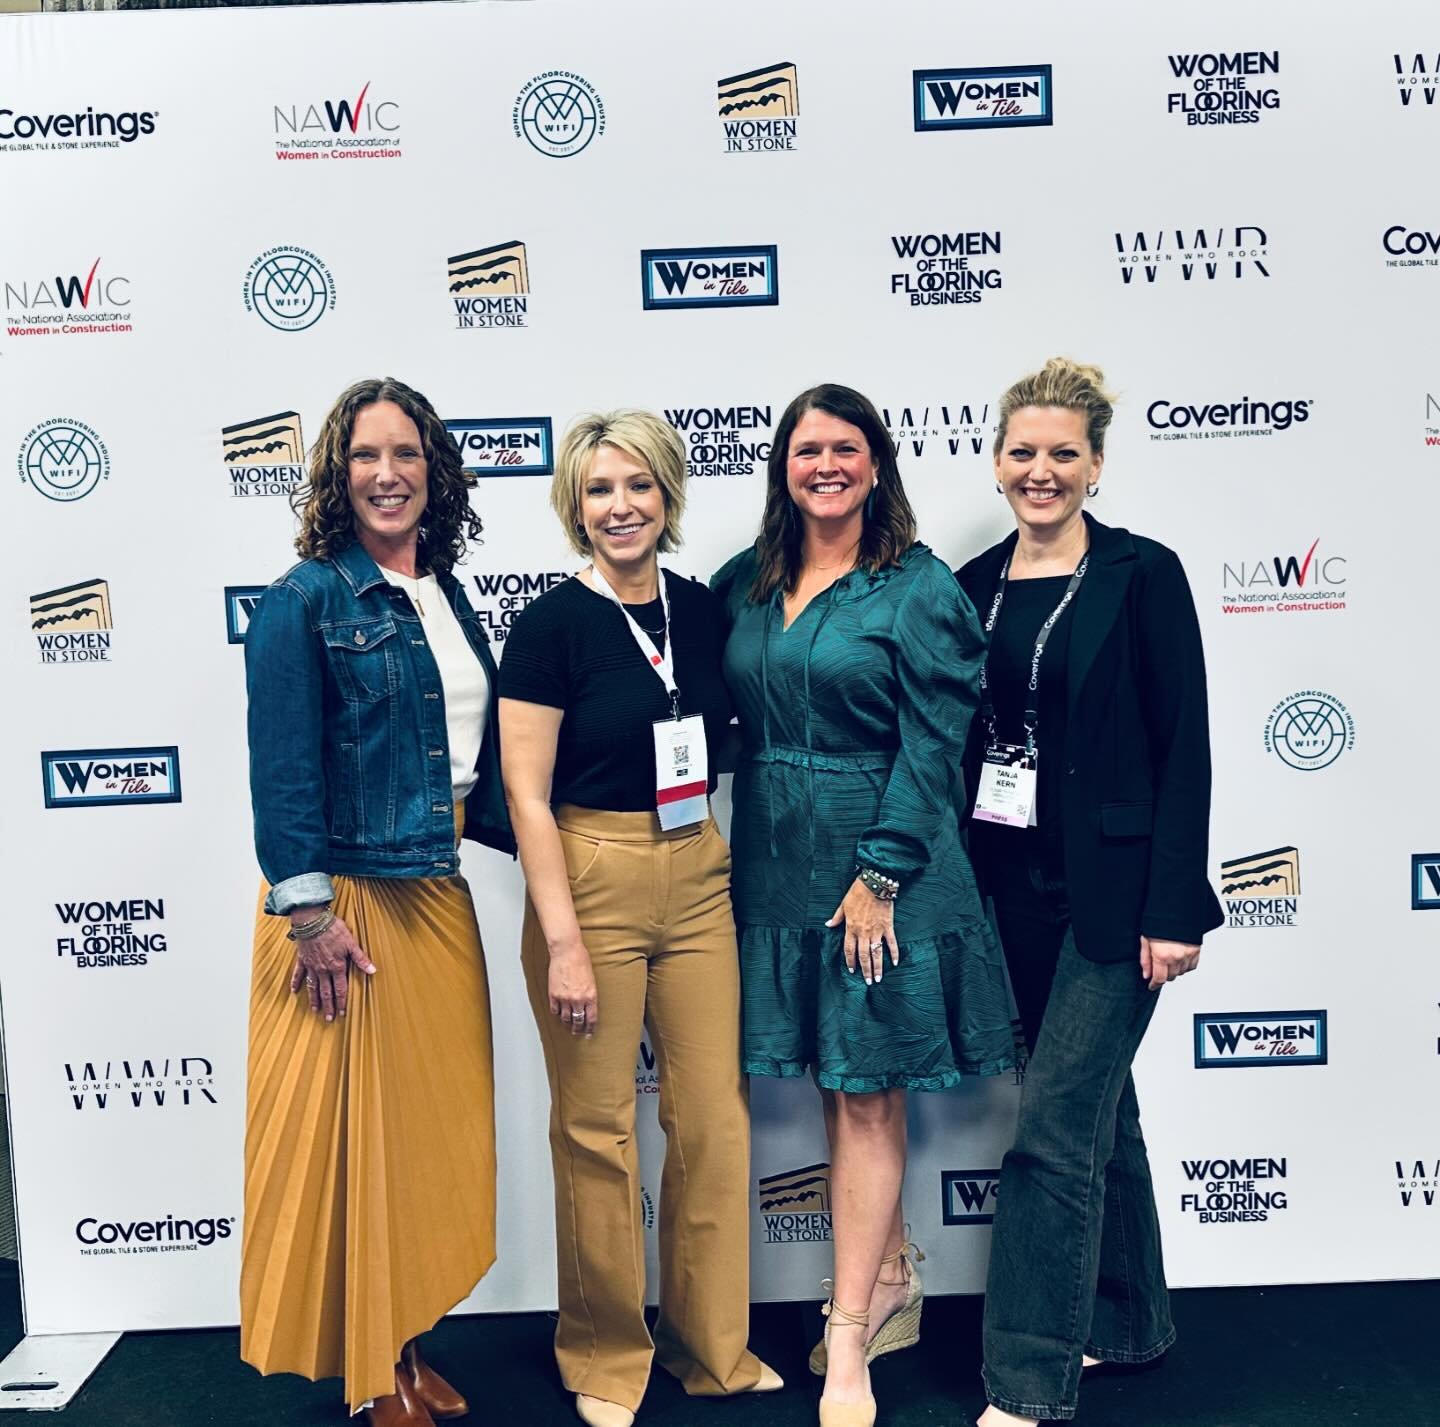 Thank you to our speakers for Her Story at @coveringsshow this week in ATL! 

Storytelling was the highlight of our networking event, including: 
Amy Rush-Imber from @floorcoveringweekly who transferred skills she honed as a professional ballerina: p